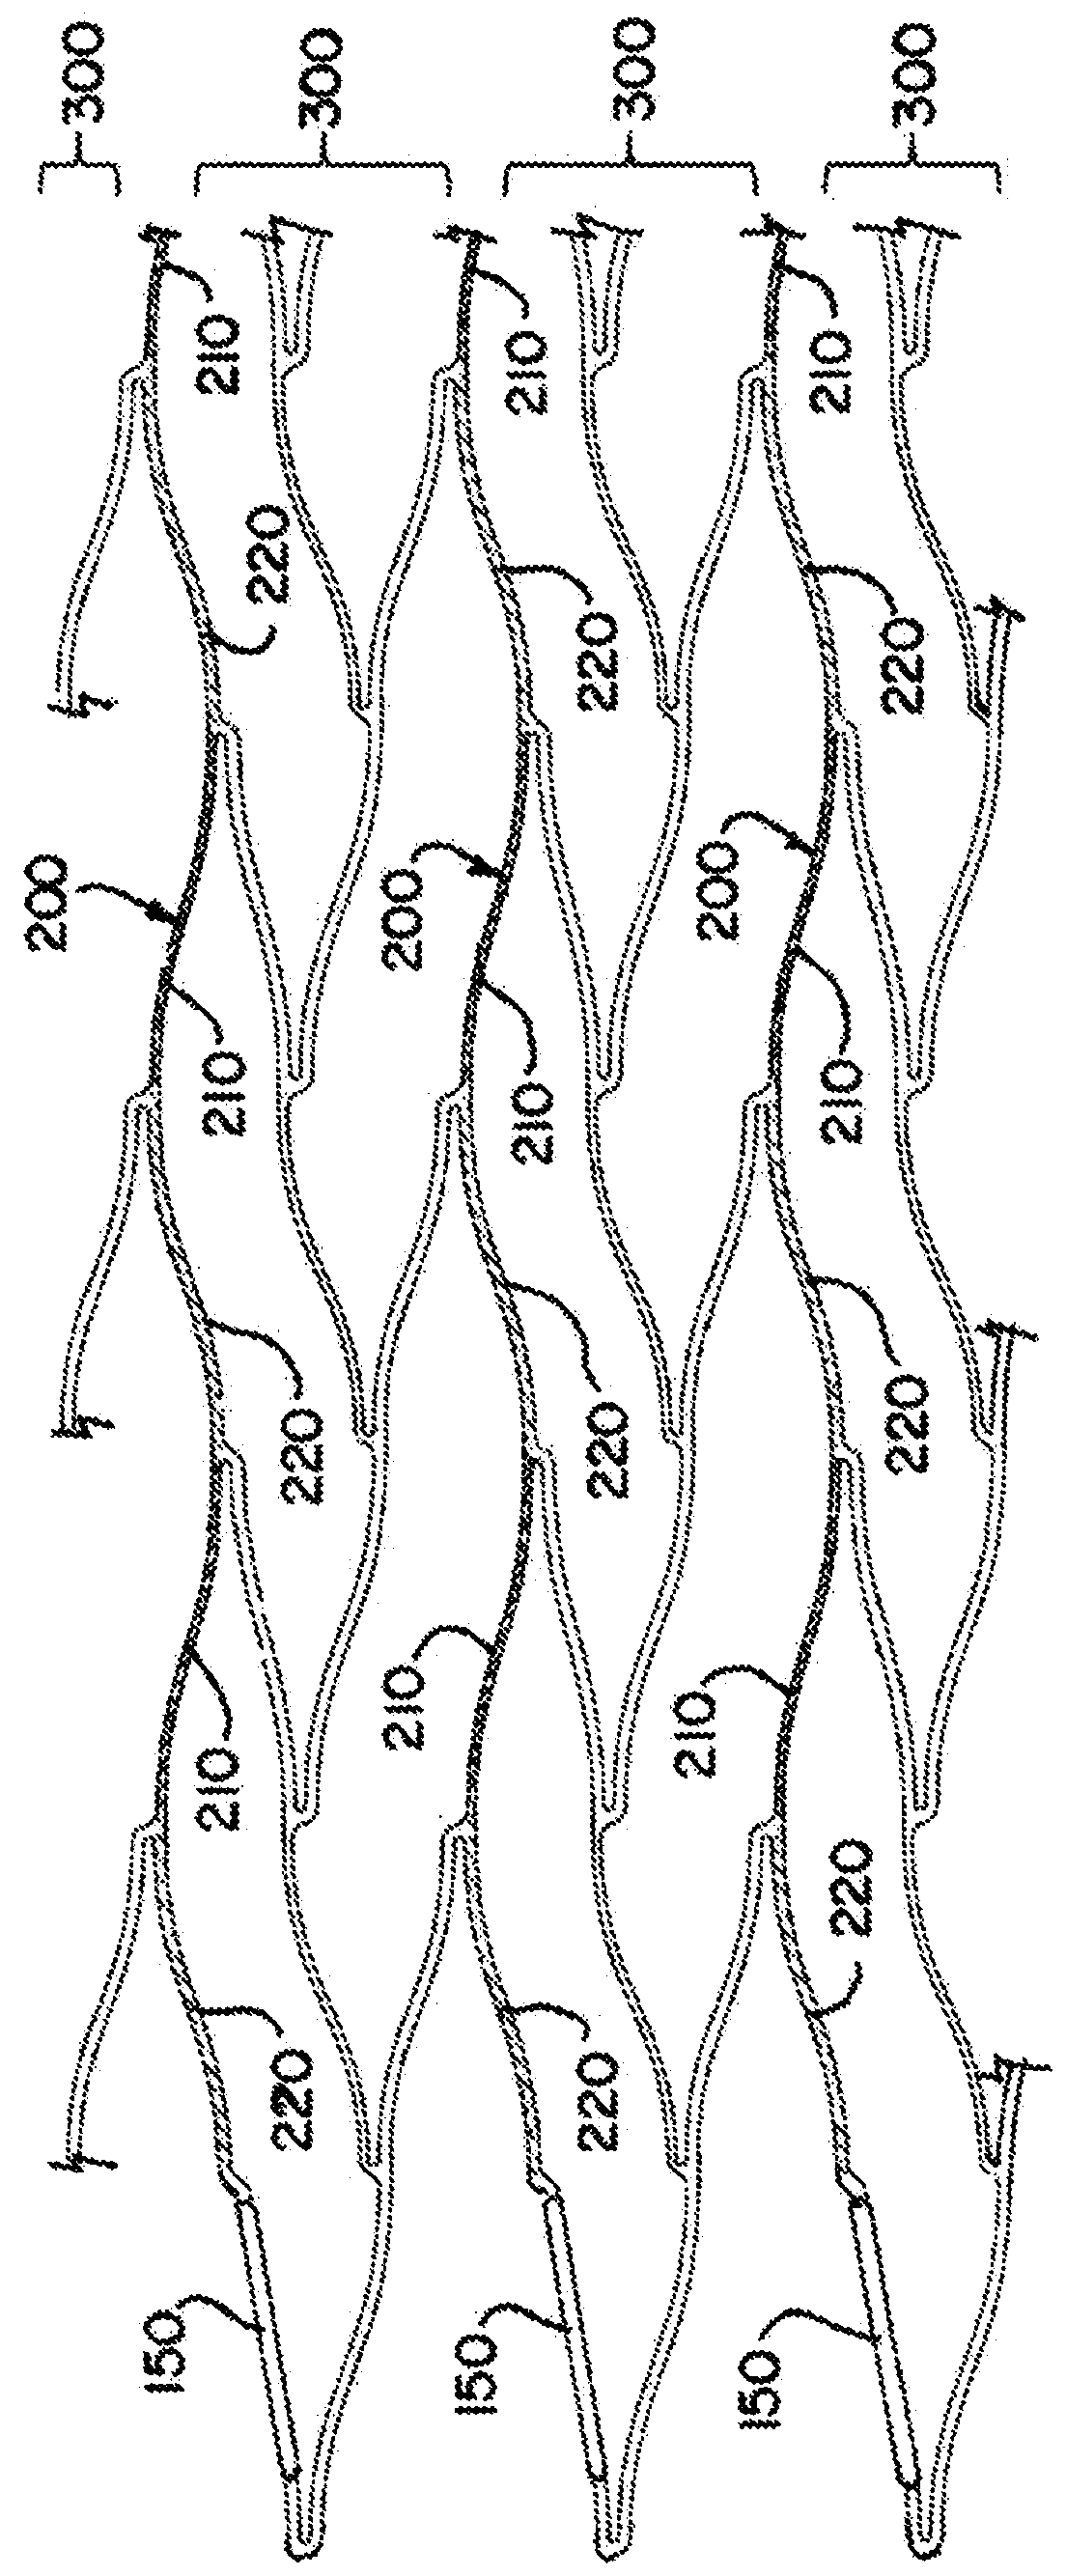 Stent with longitudinal variable width struts